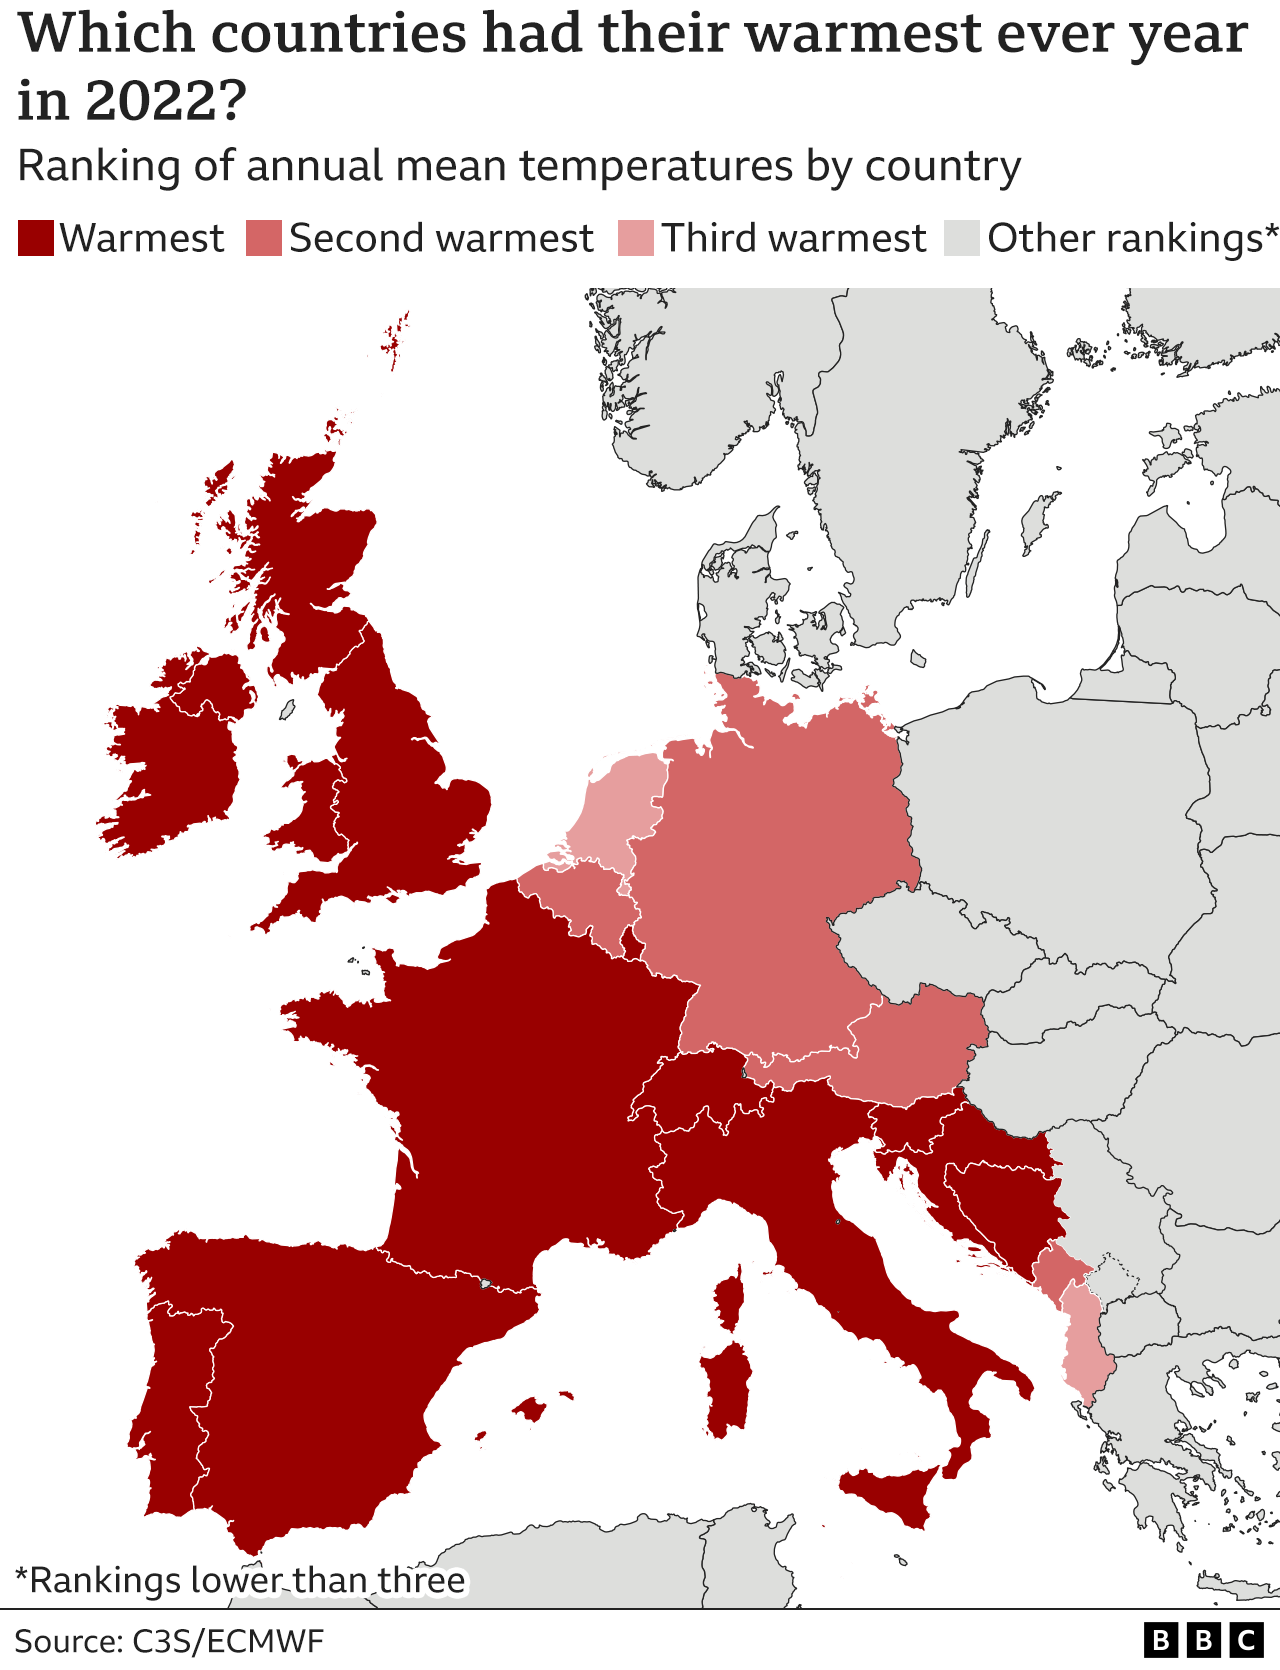 Map showing which countries had their warmest year ever in 2022